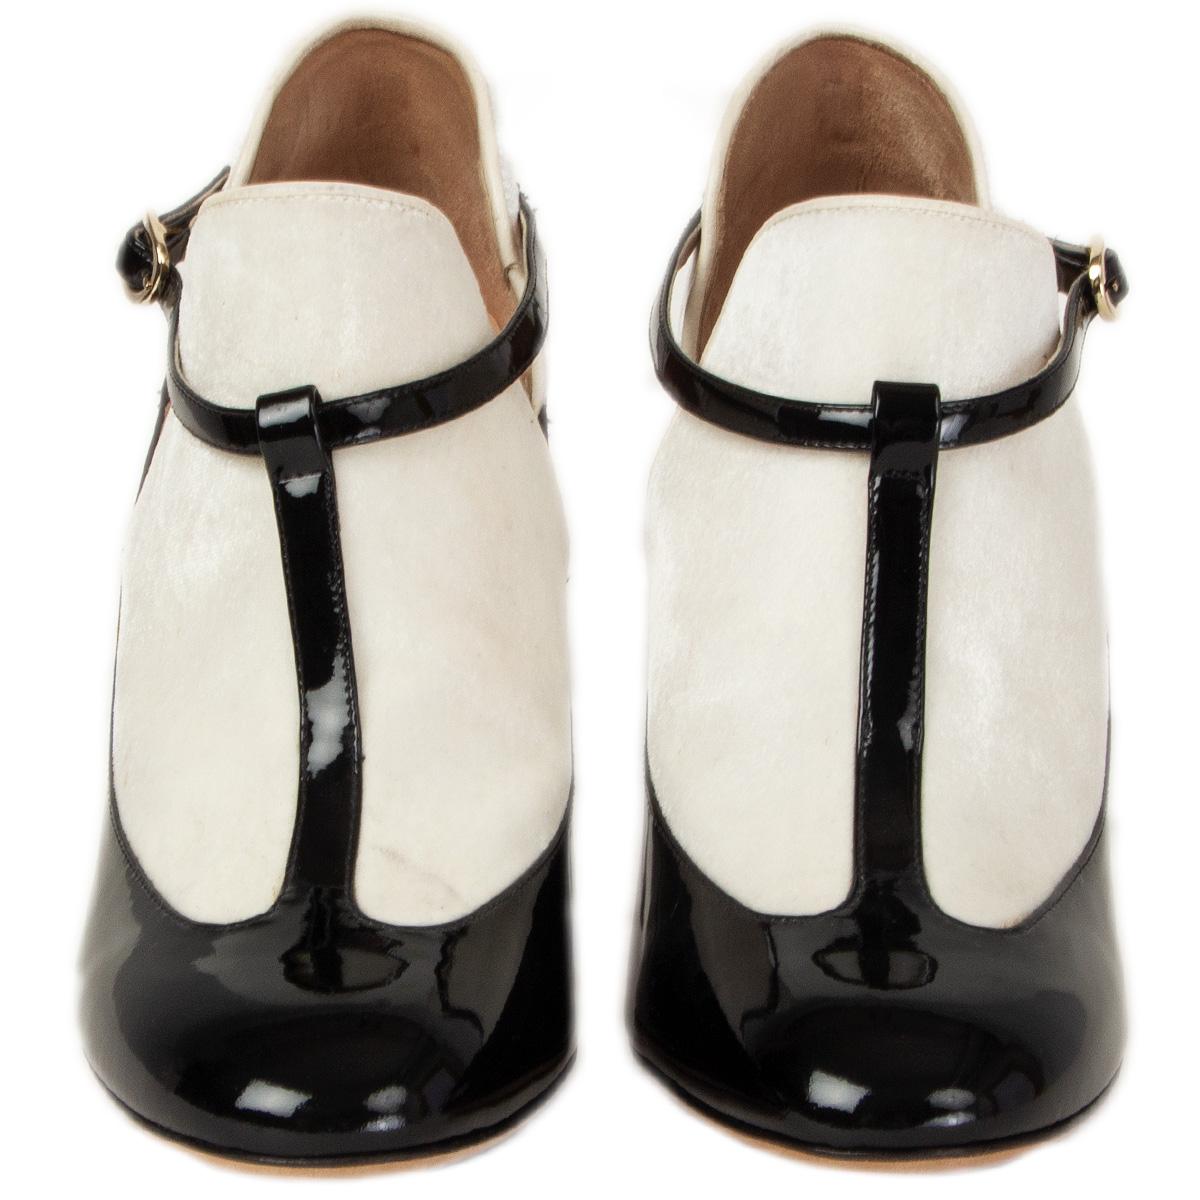 100% authentic Valentino T-Bar pumps in white velvet and black patent leather. Close with a buckle on the side. Have been worn with a faint stain at the right shoe's front part and on the side. Overall in very good condition.